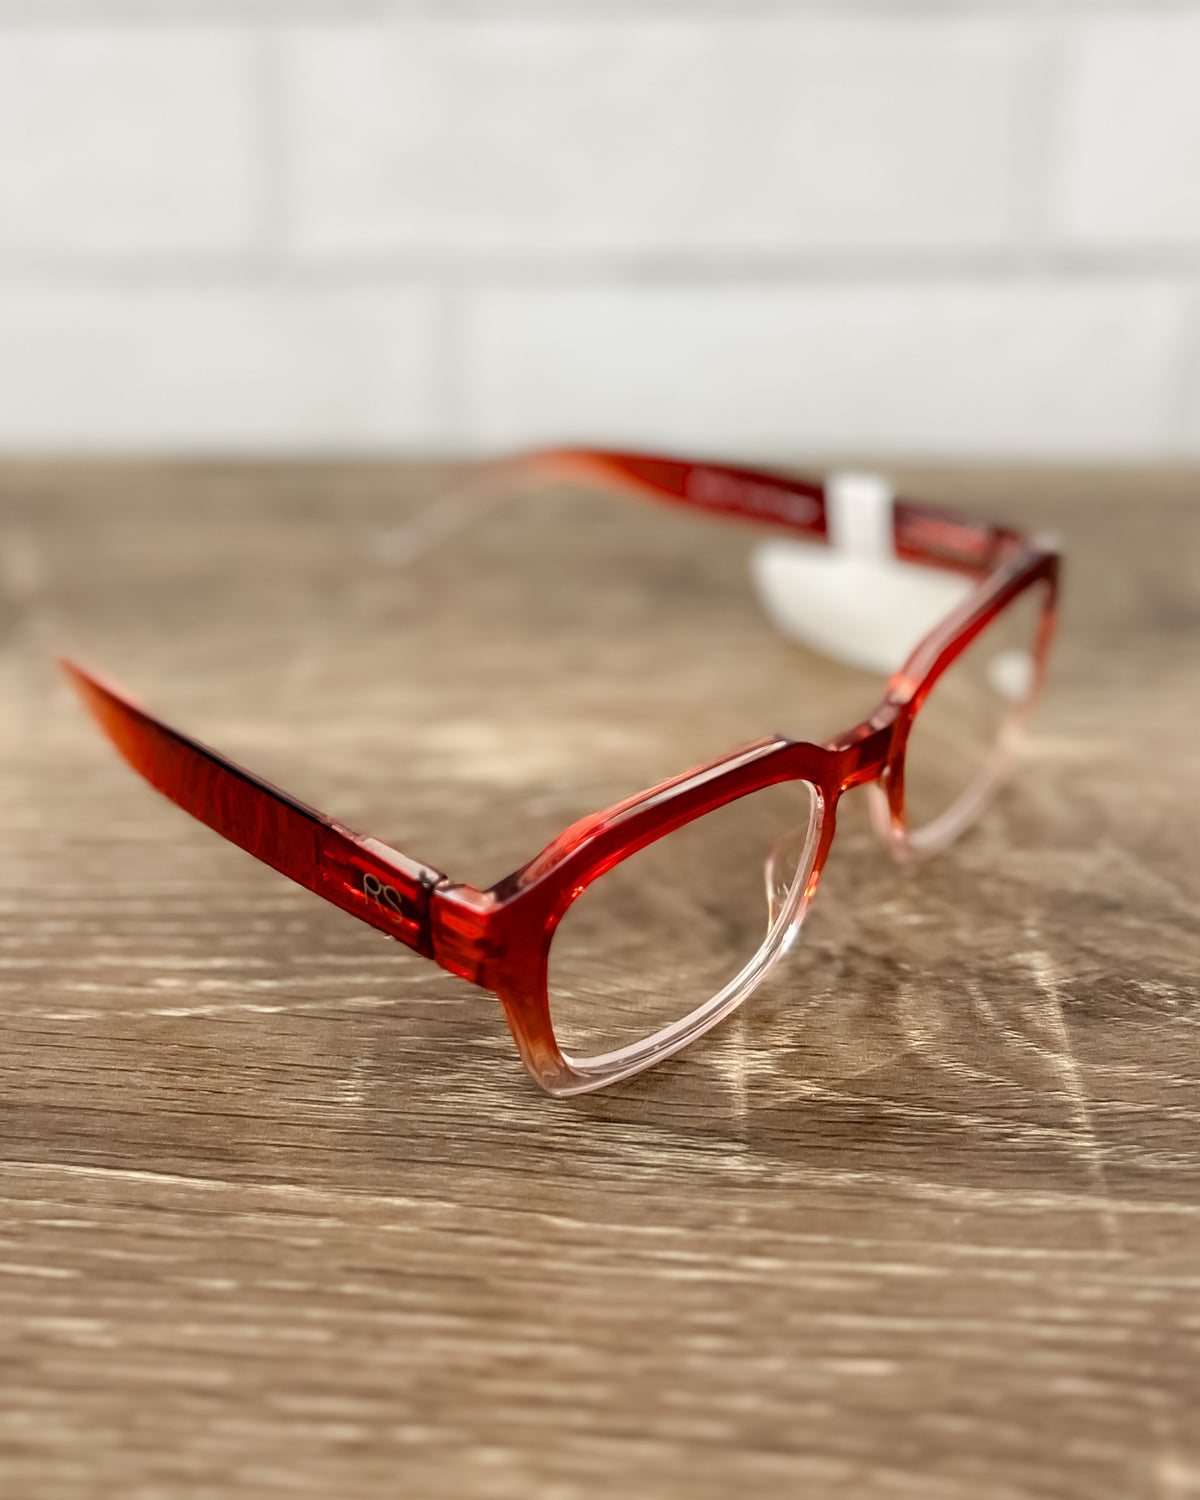 Red Ombre Readers - RS1167